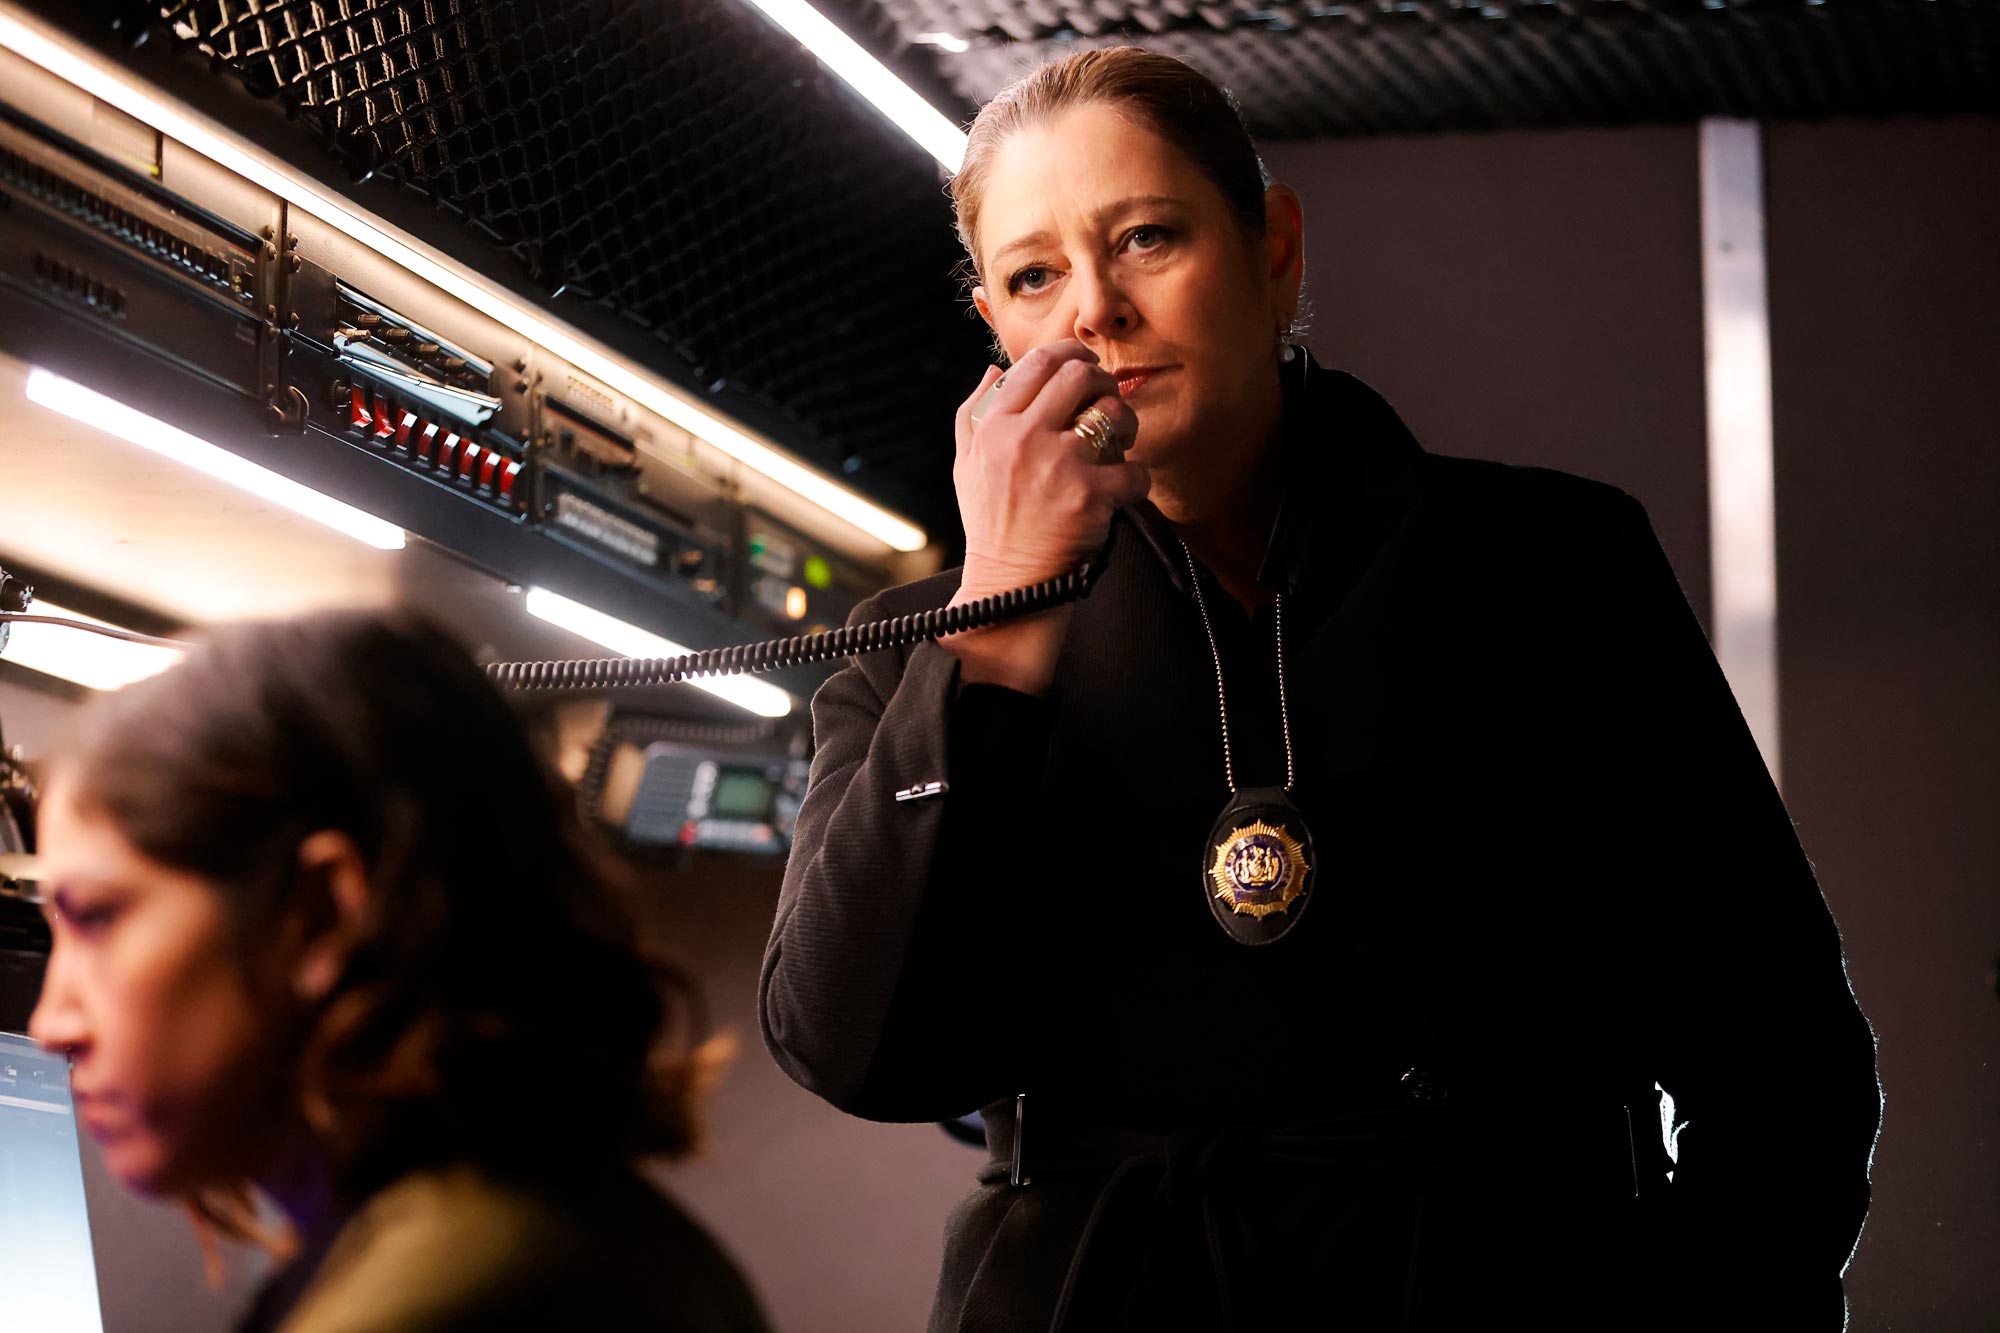 Law and Order’ Star Camryn Manheim to Leave Show After Season 23 Finale 003